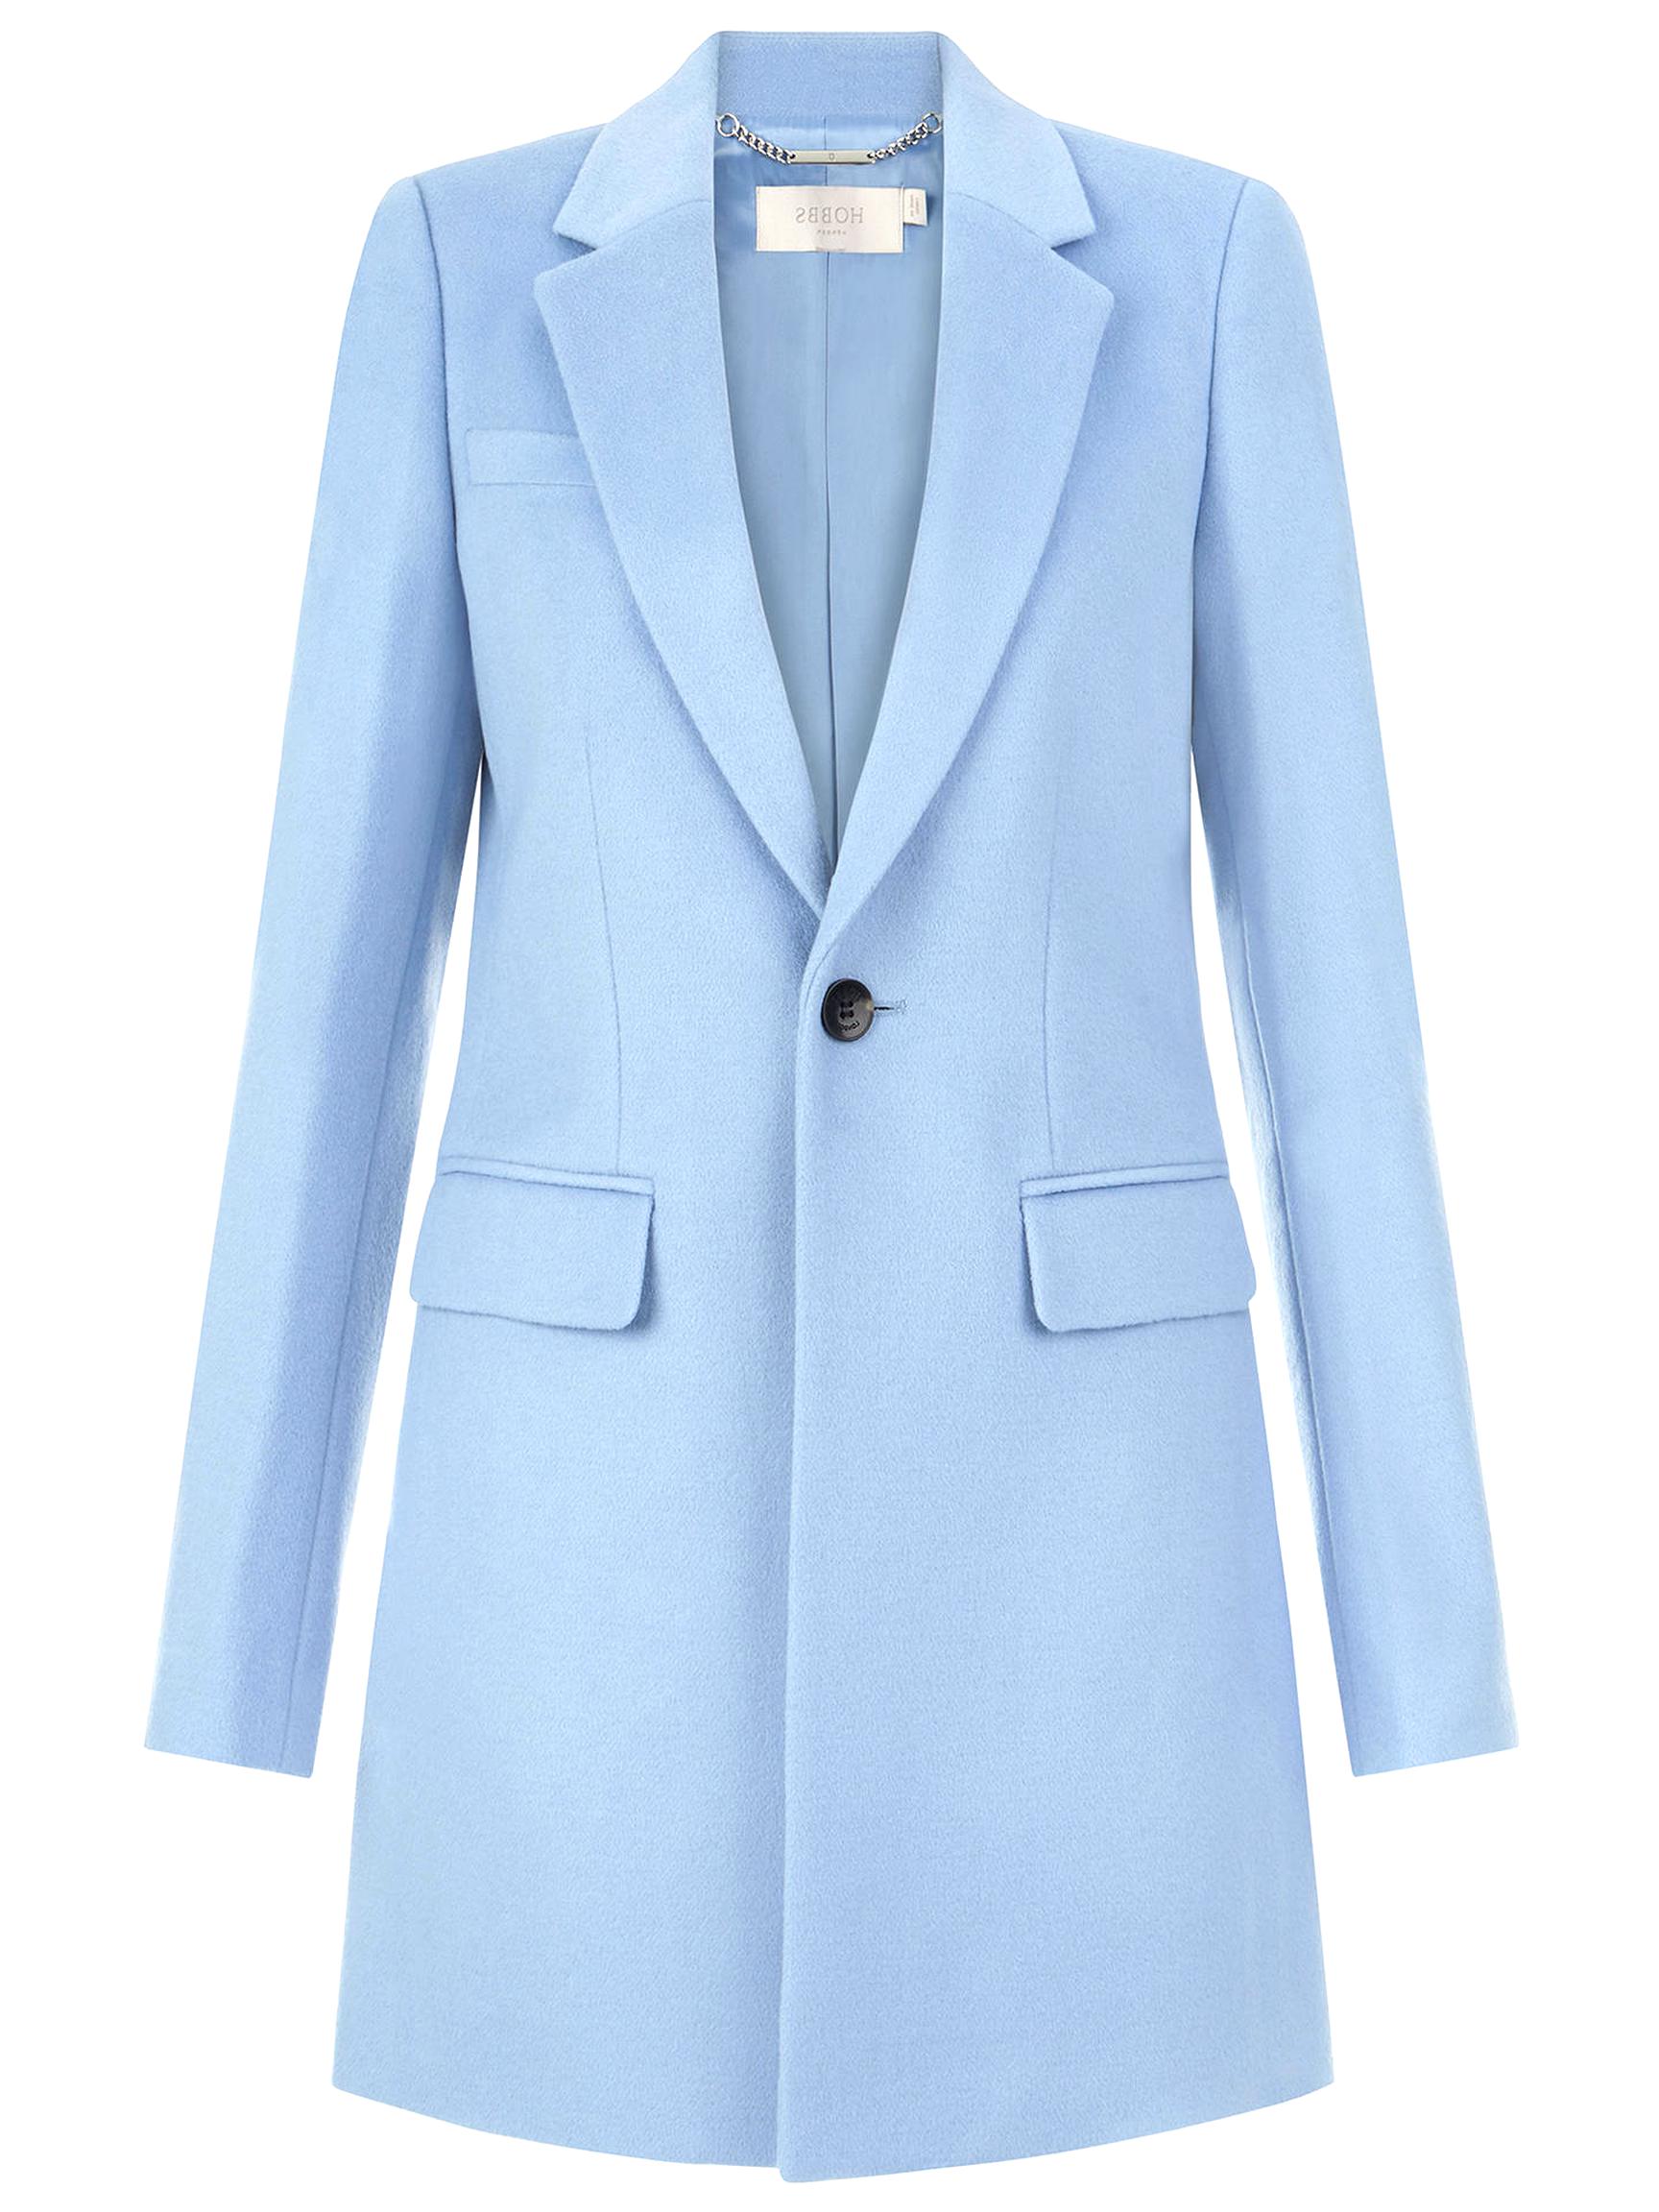 Pale Blue Coat for sale in UK | 83 used Pale Blue Coats